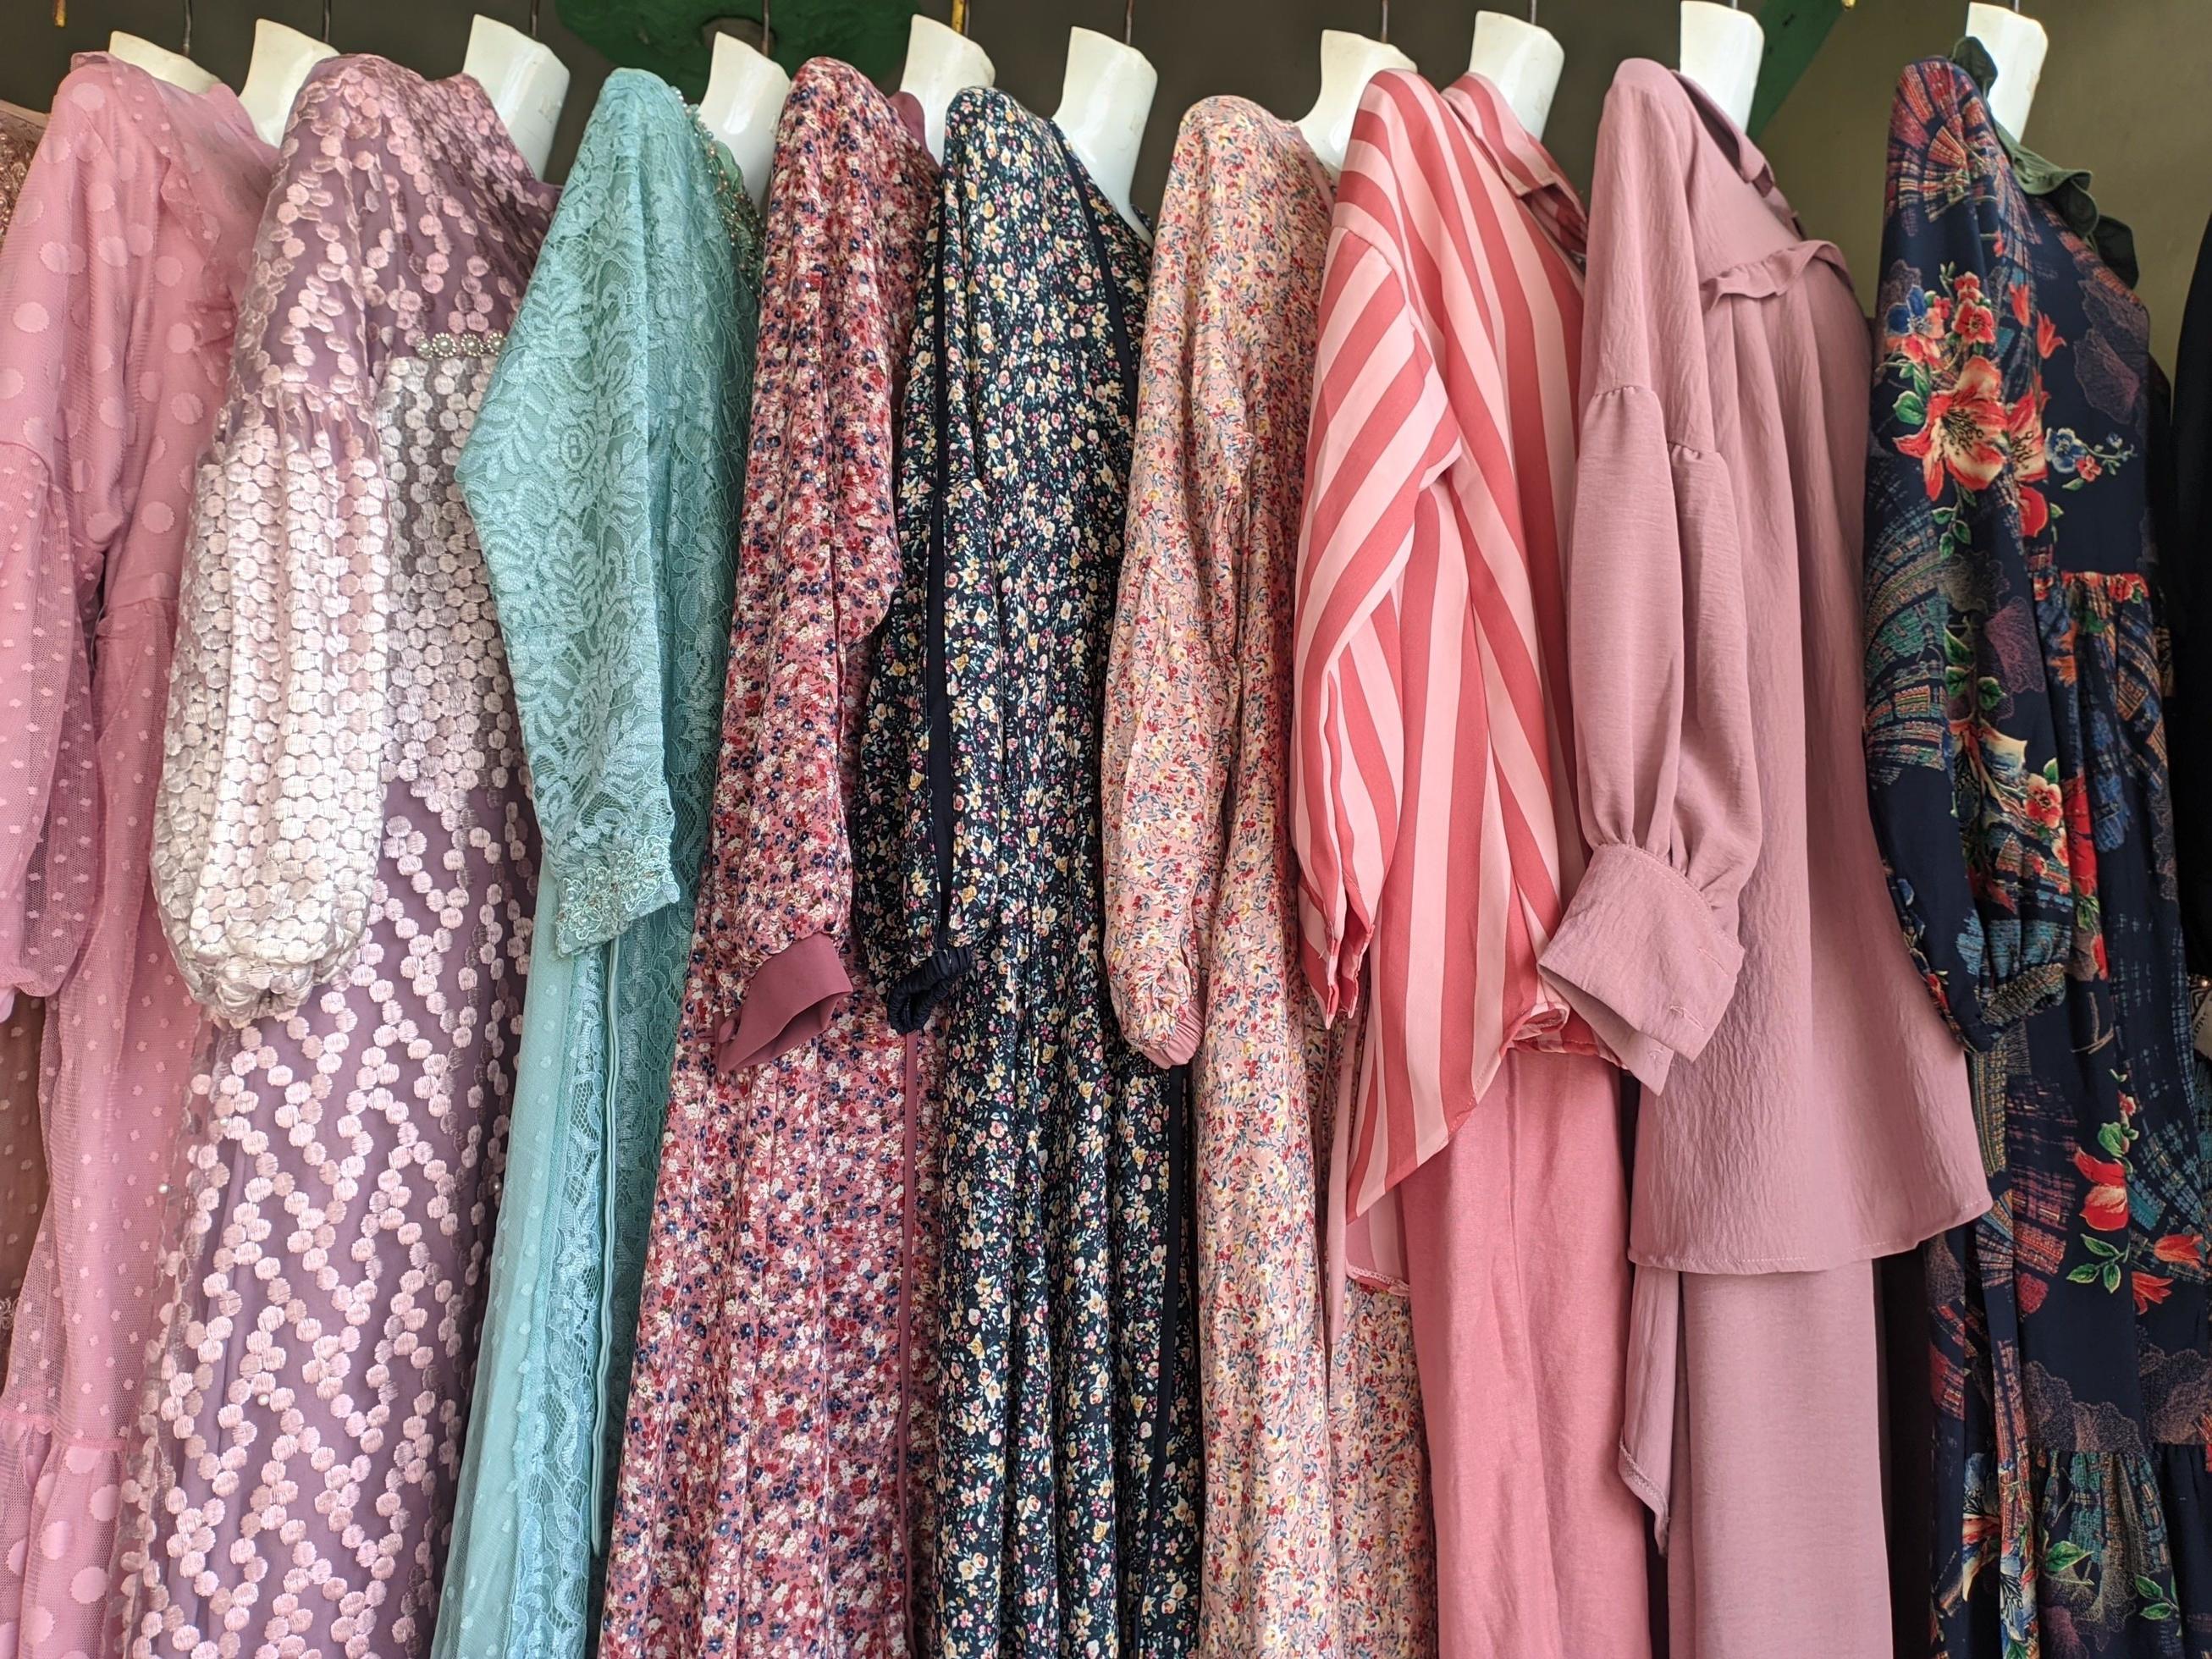 a collection of local women's clothing hanging and sold in